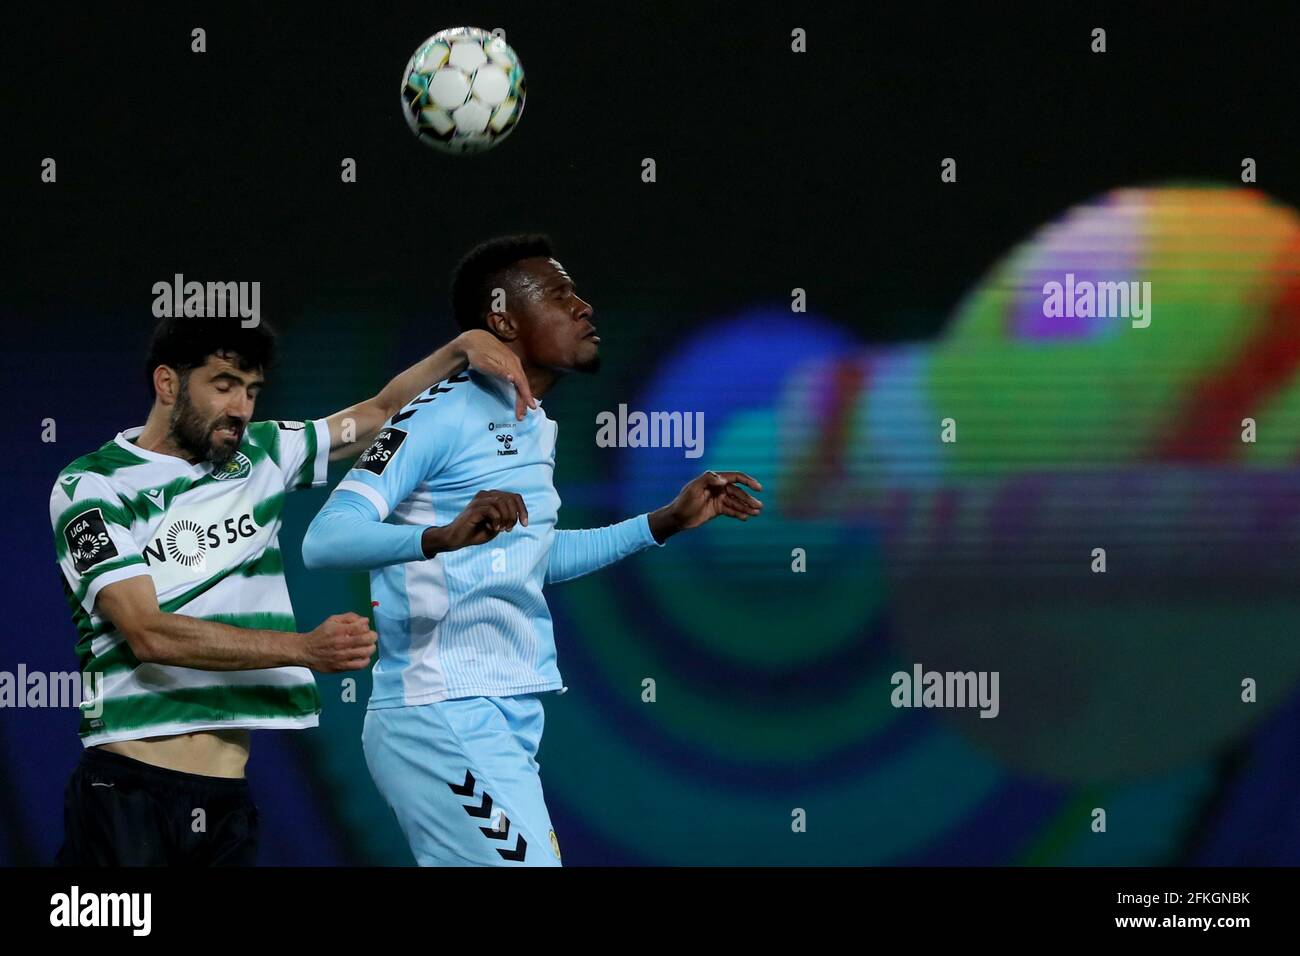 Lisbon, Portugal. 1st May, 2021. Luis Neto of Sporting CP (L) vies with Pedrao of CD Nacional during the Portuguese League football match between Sporting CP and CD Nacional at Jose Alvalade stadium in Lisbon, Portugal on May 1, 2021. Credit: Pedro Fiuza/ZUMA Wire/Alamy Live News Stock Photo